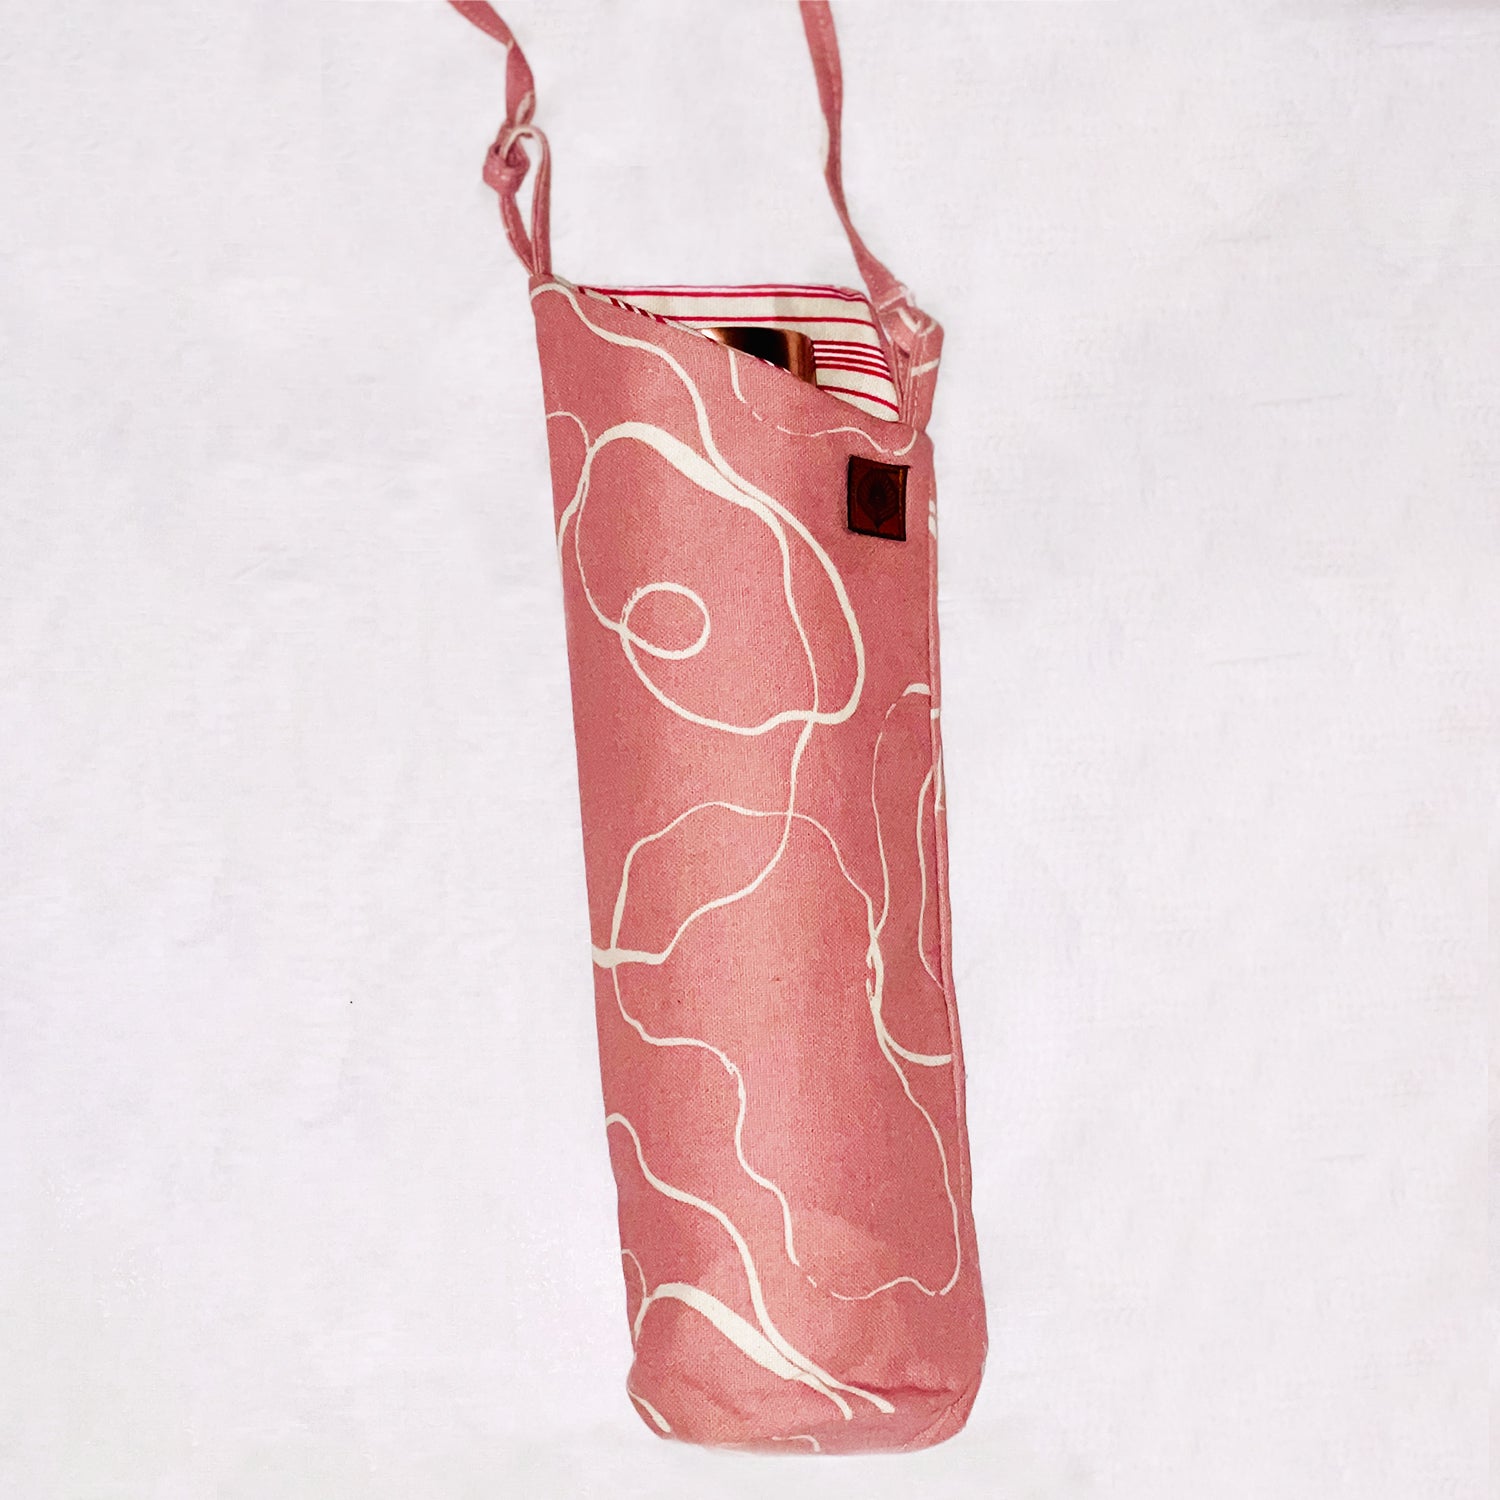 Soft Pink Cotton Canvas Bottle Cover/Bag - 13 inches x 6 inches